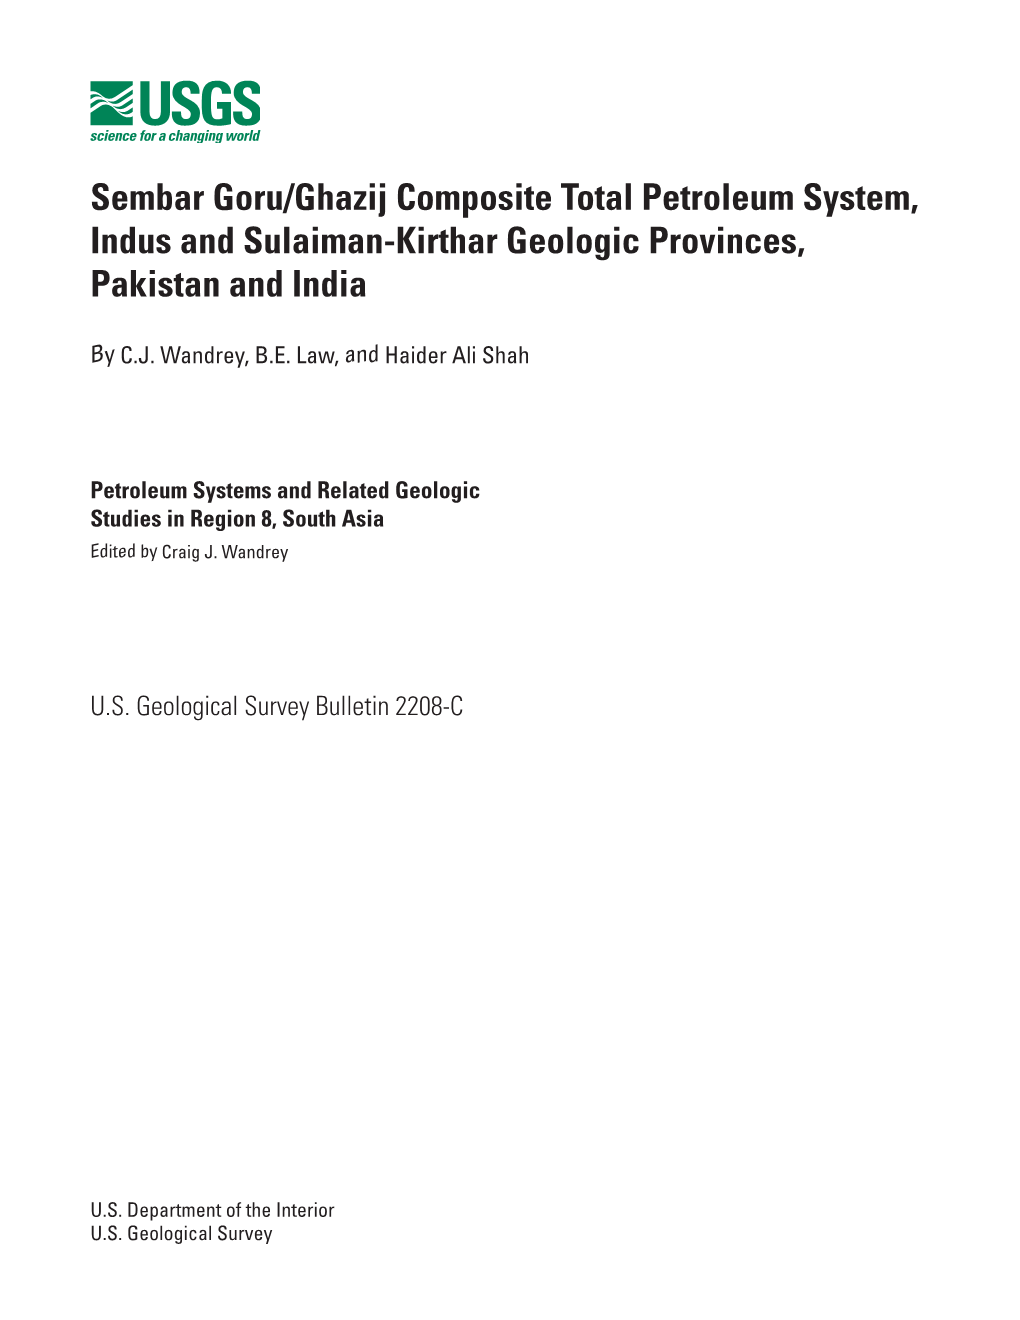 Sembar Goru/Ghazij Composite Total Petroleum System, Indus and Sulaiman-Kirthar Geologic Provinces, Pakistan and India